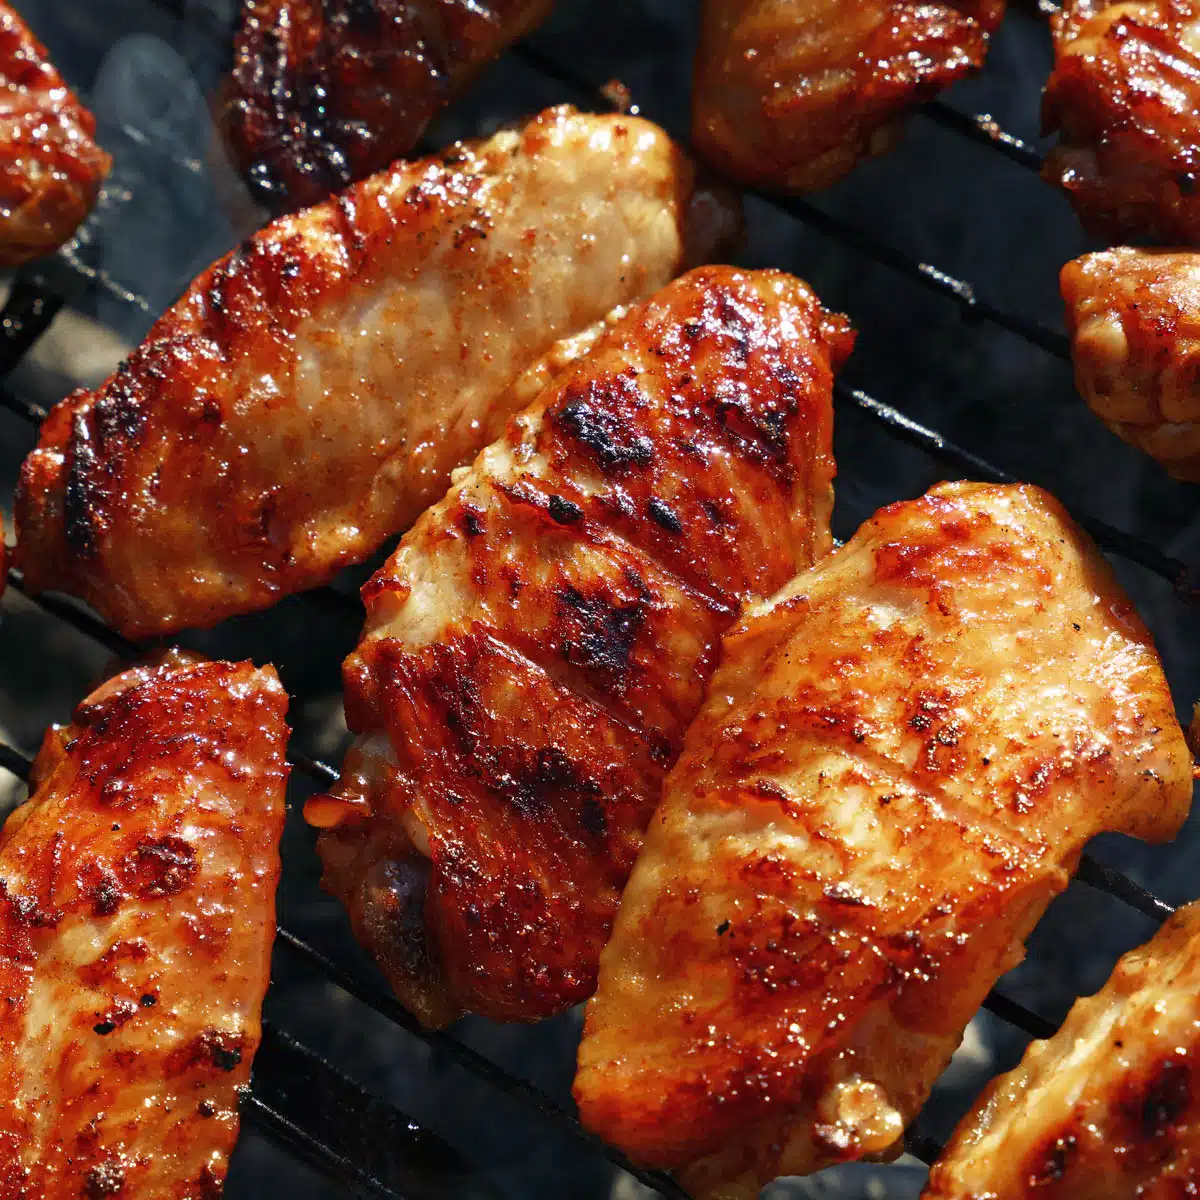 Grilled chicken wings on the grill.